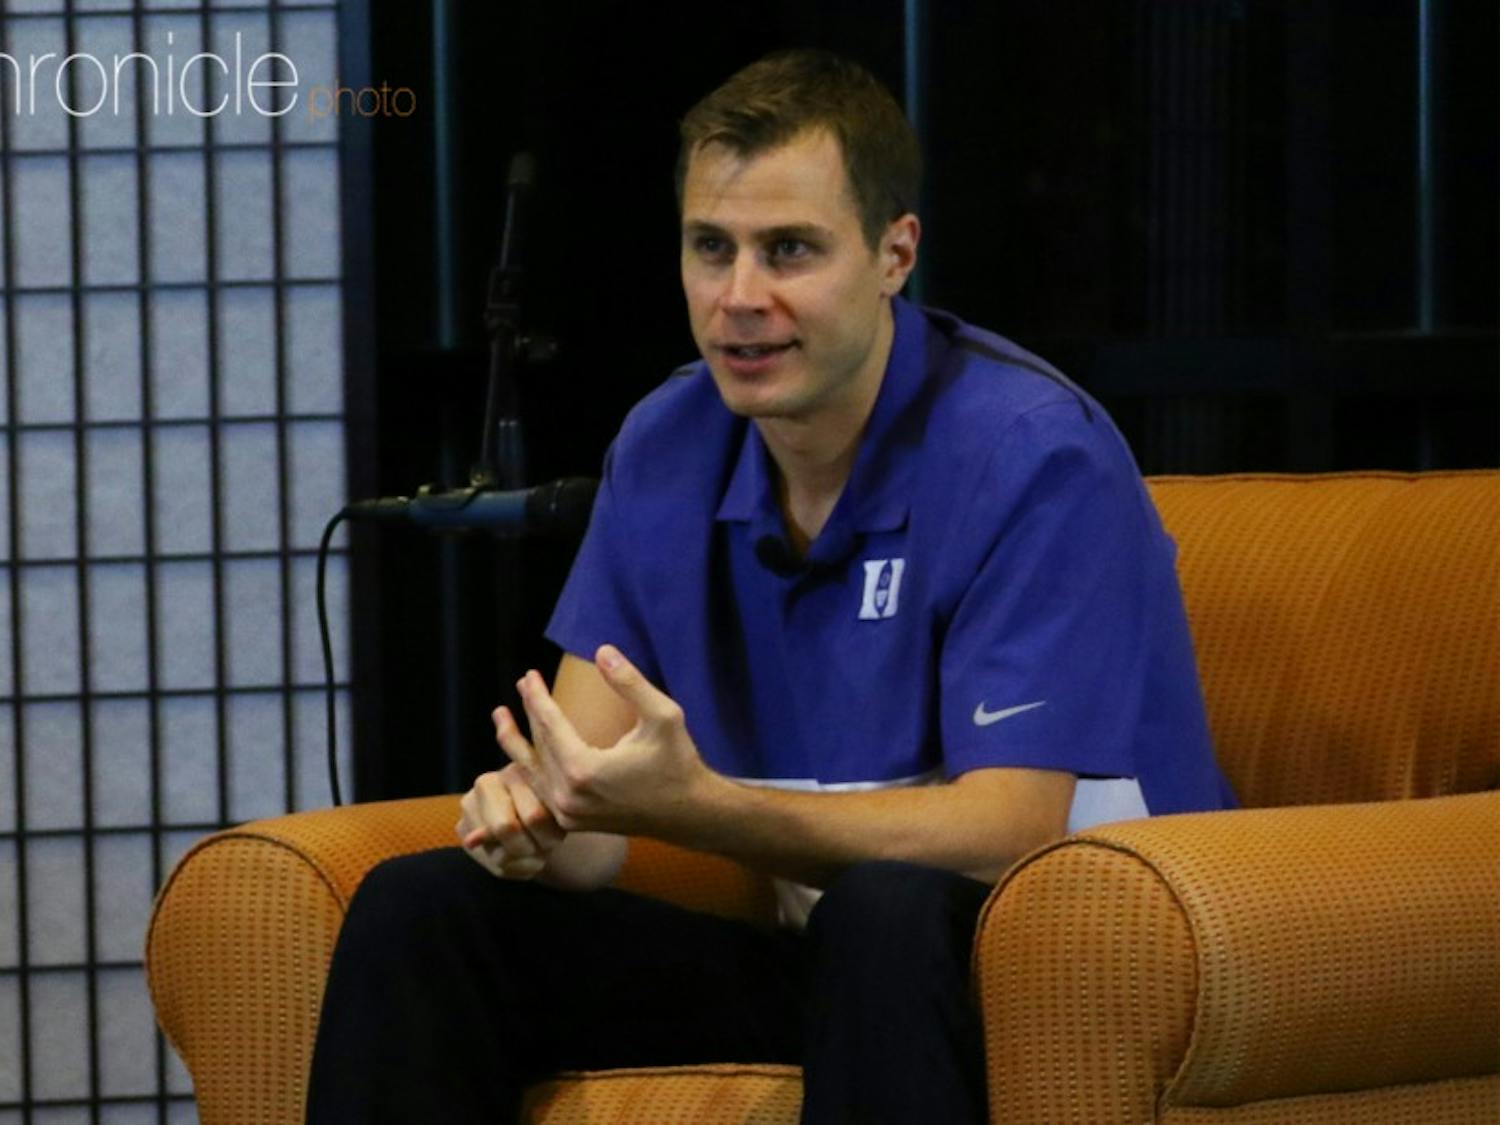 Men’s basketball assistant coach Jon Scheyer has won two national championships at Duke—one as a player and one as a coach.